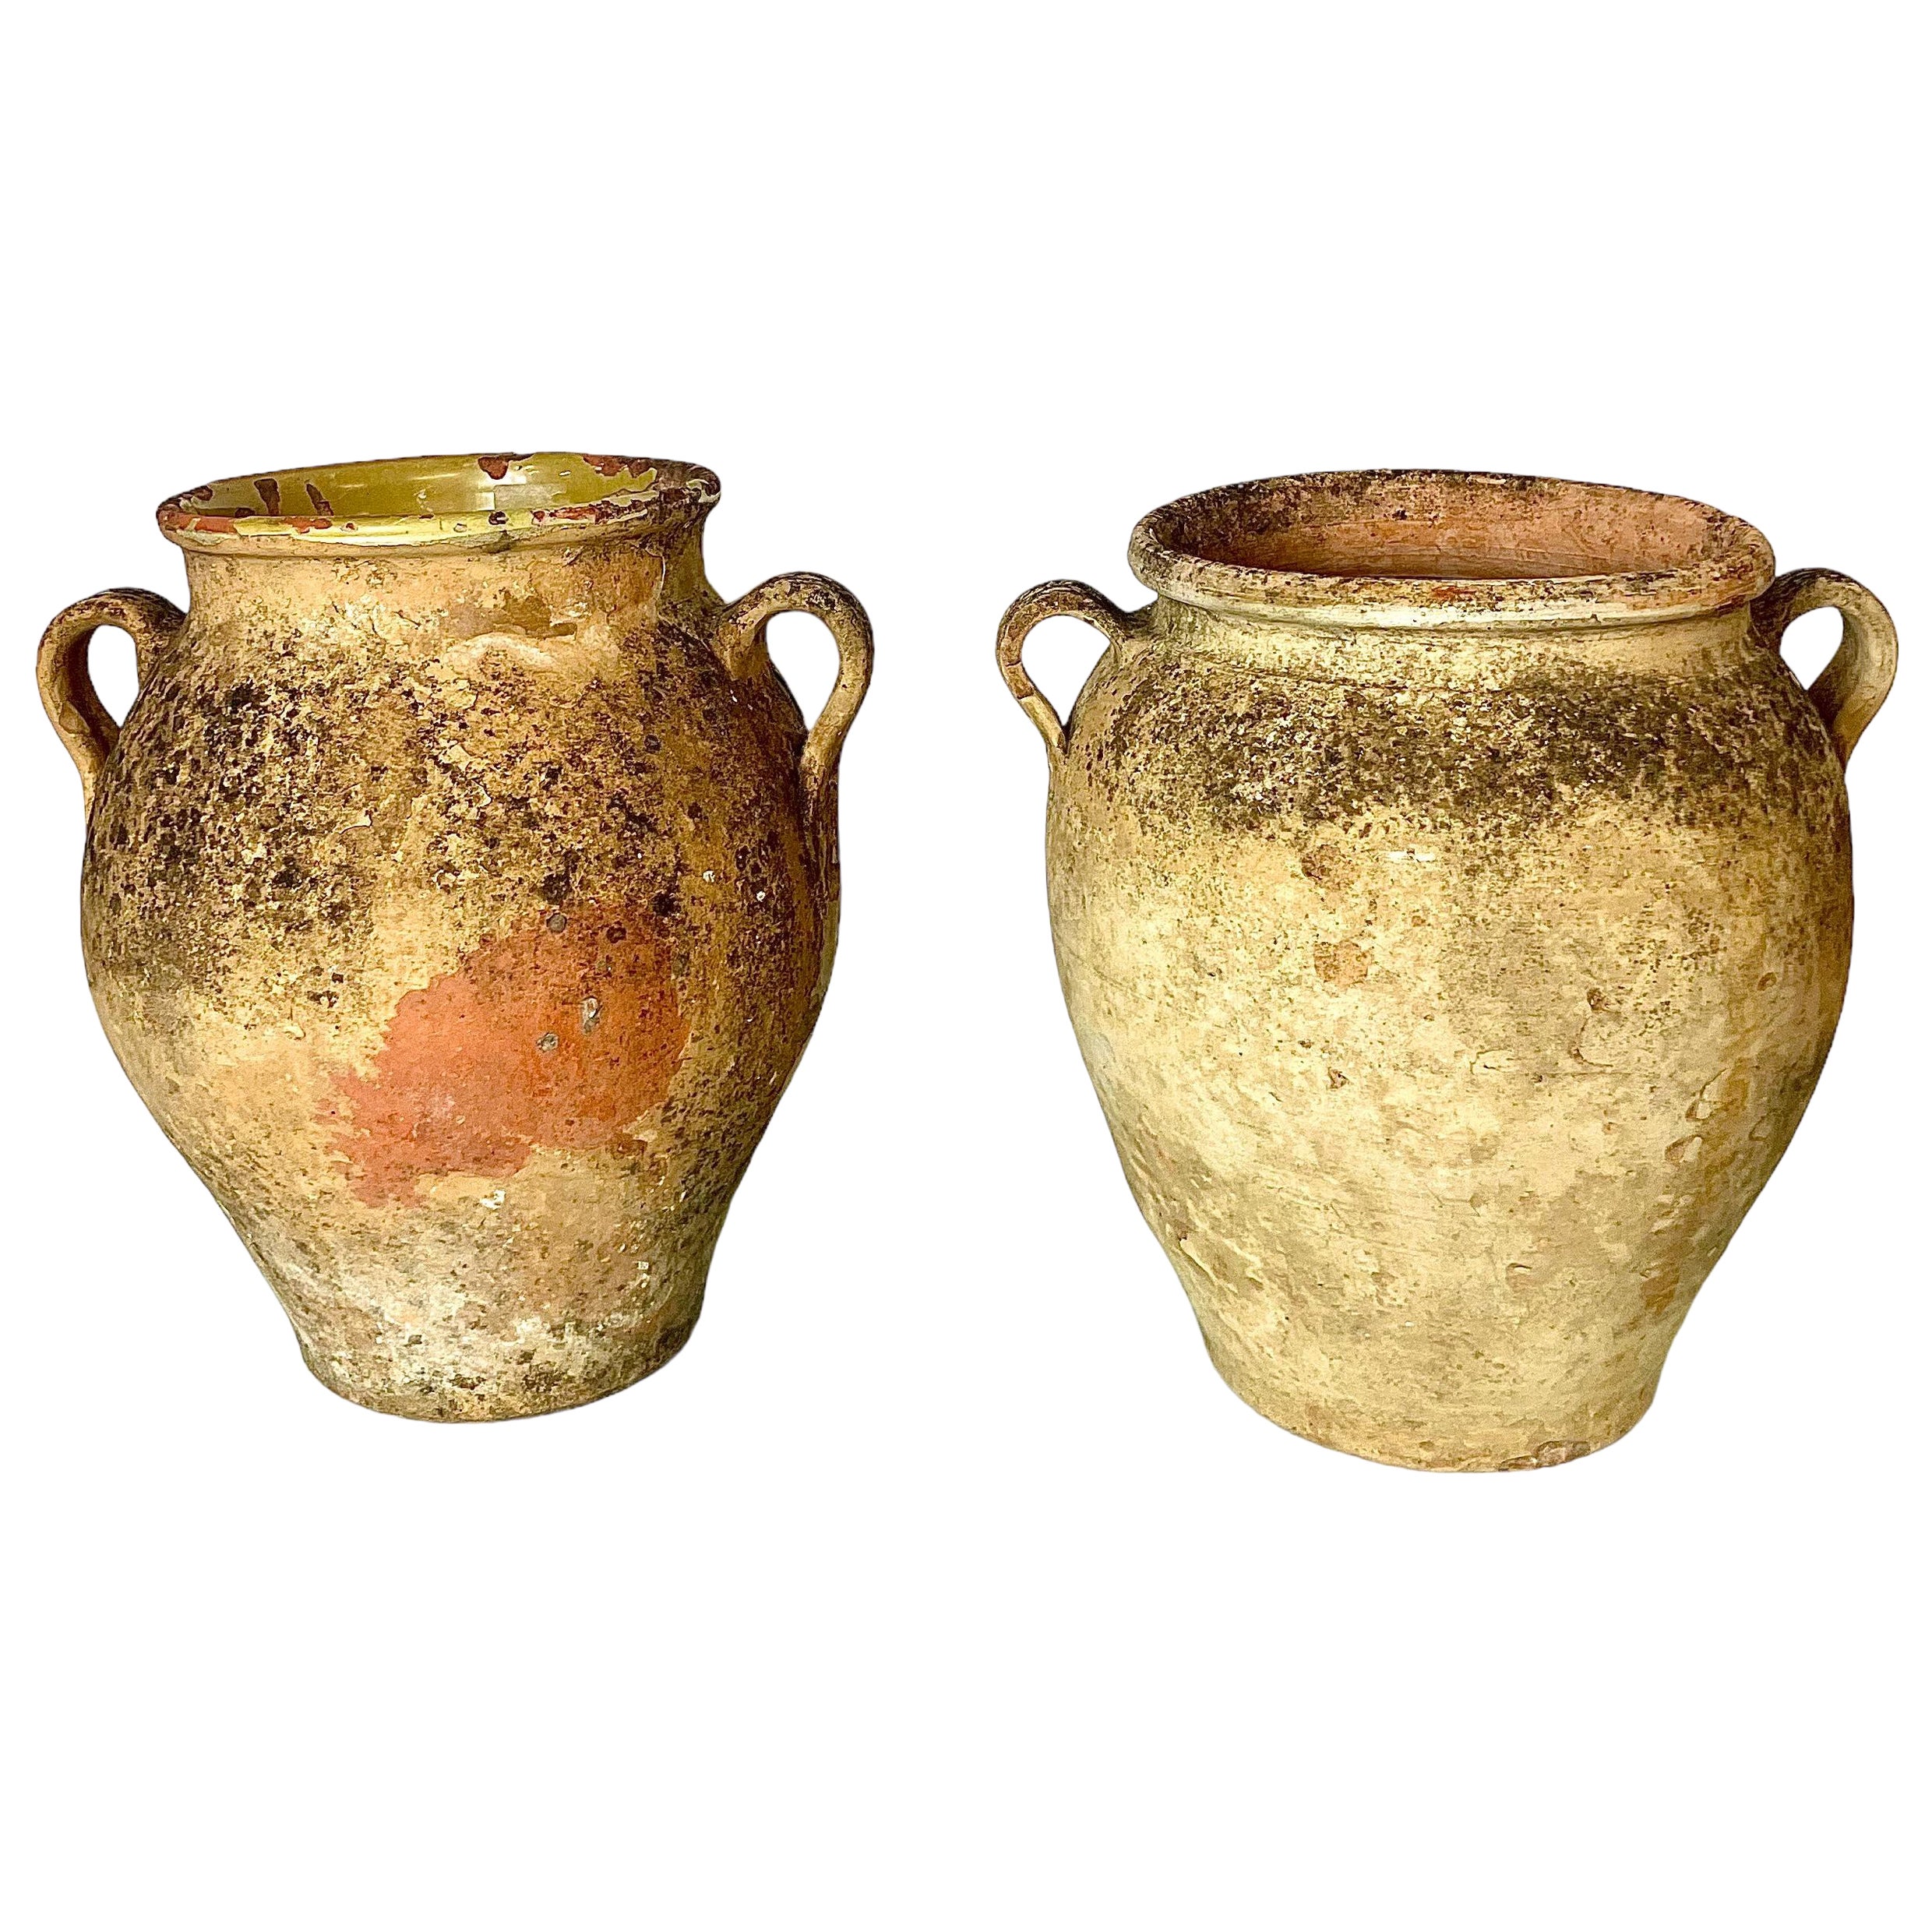 Pair of 19th Century French Terracotta Confit Pots